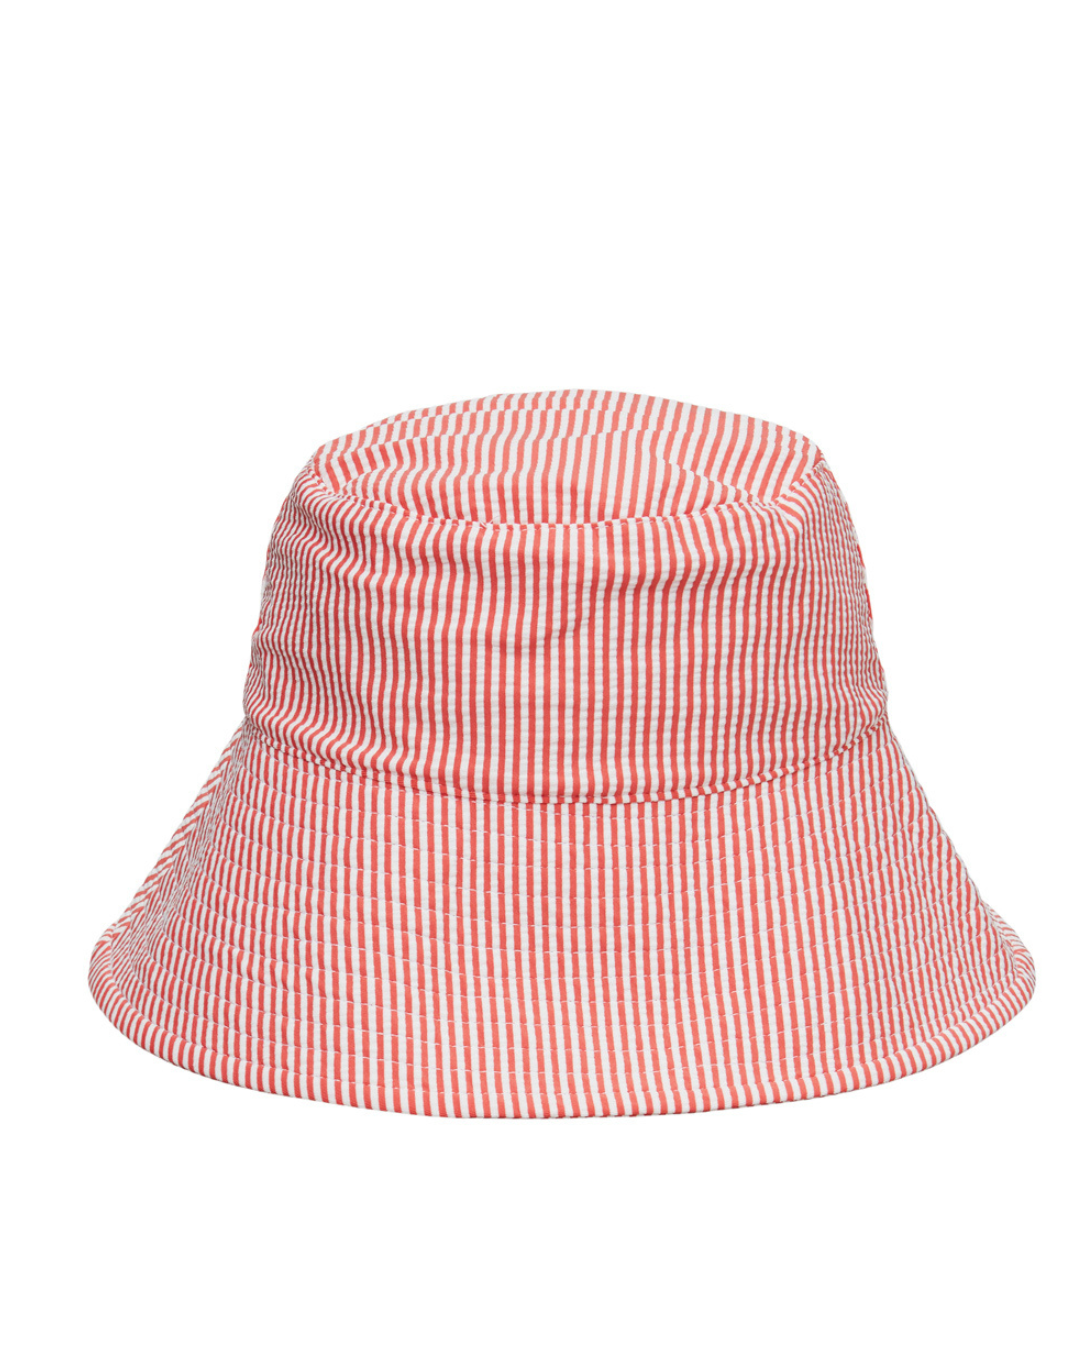 Striba Bucket Hat Spiced Coral